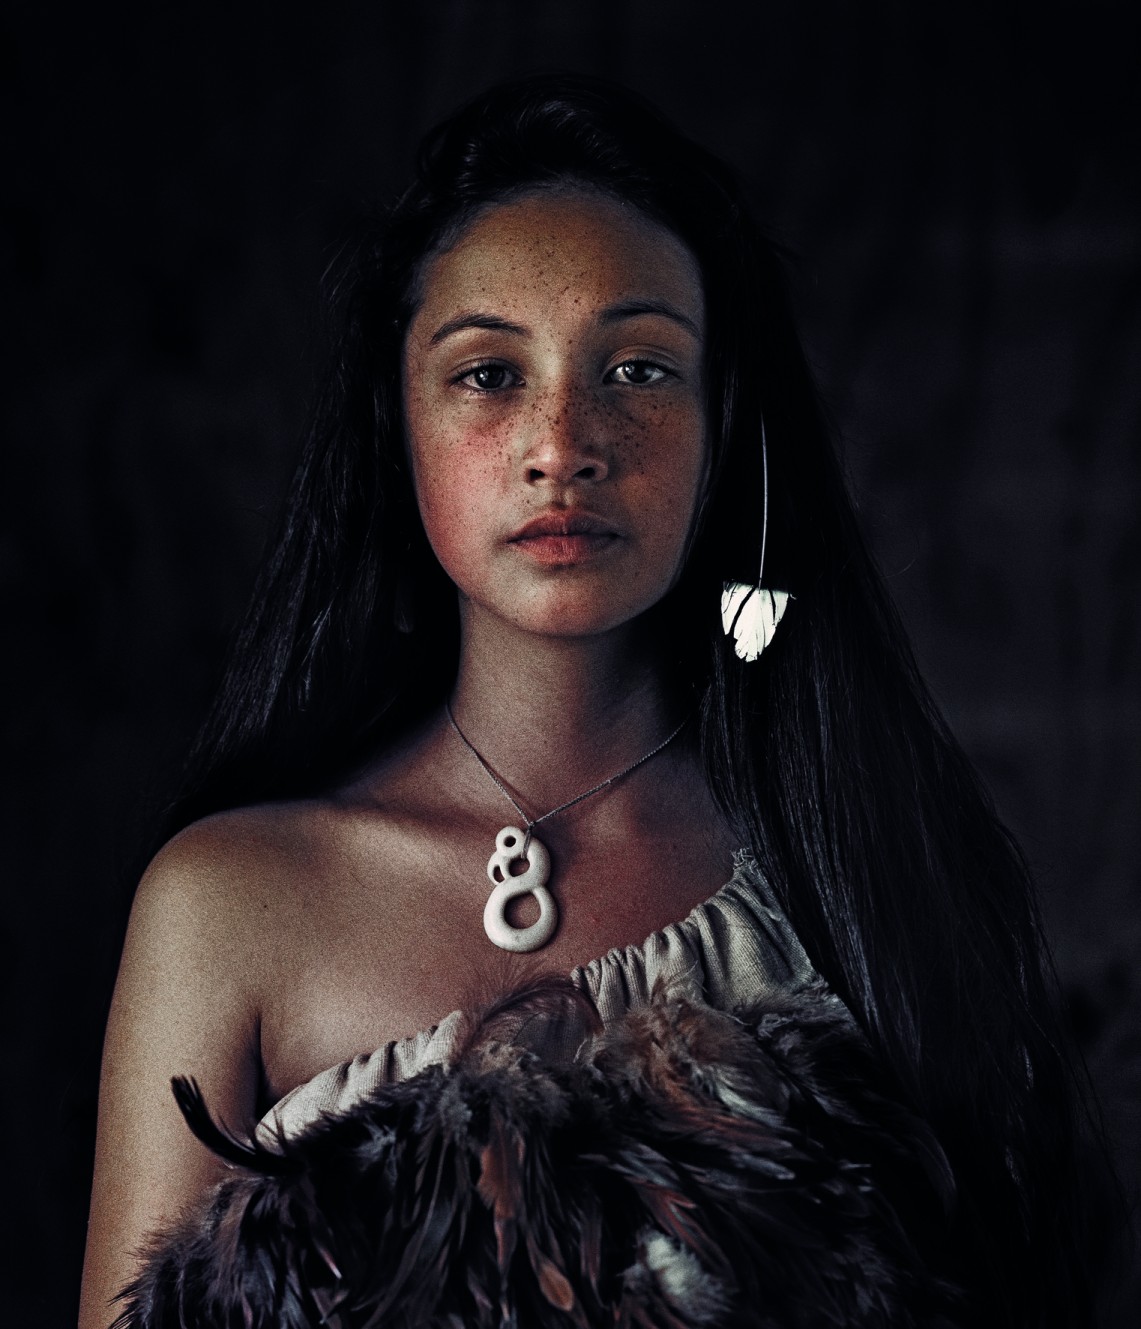 Stunning Photographs Of The World's Last Indigenous Tribes - TAUPO VILLAGE